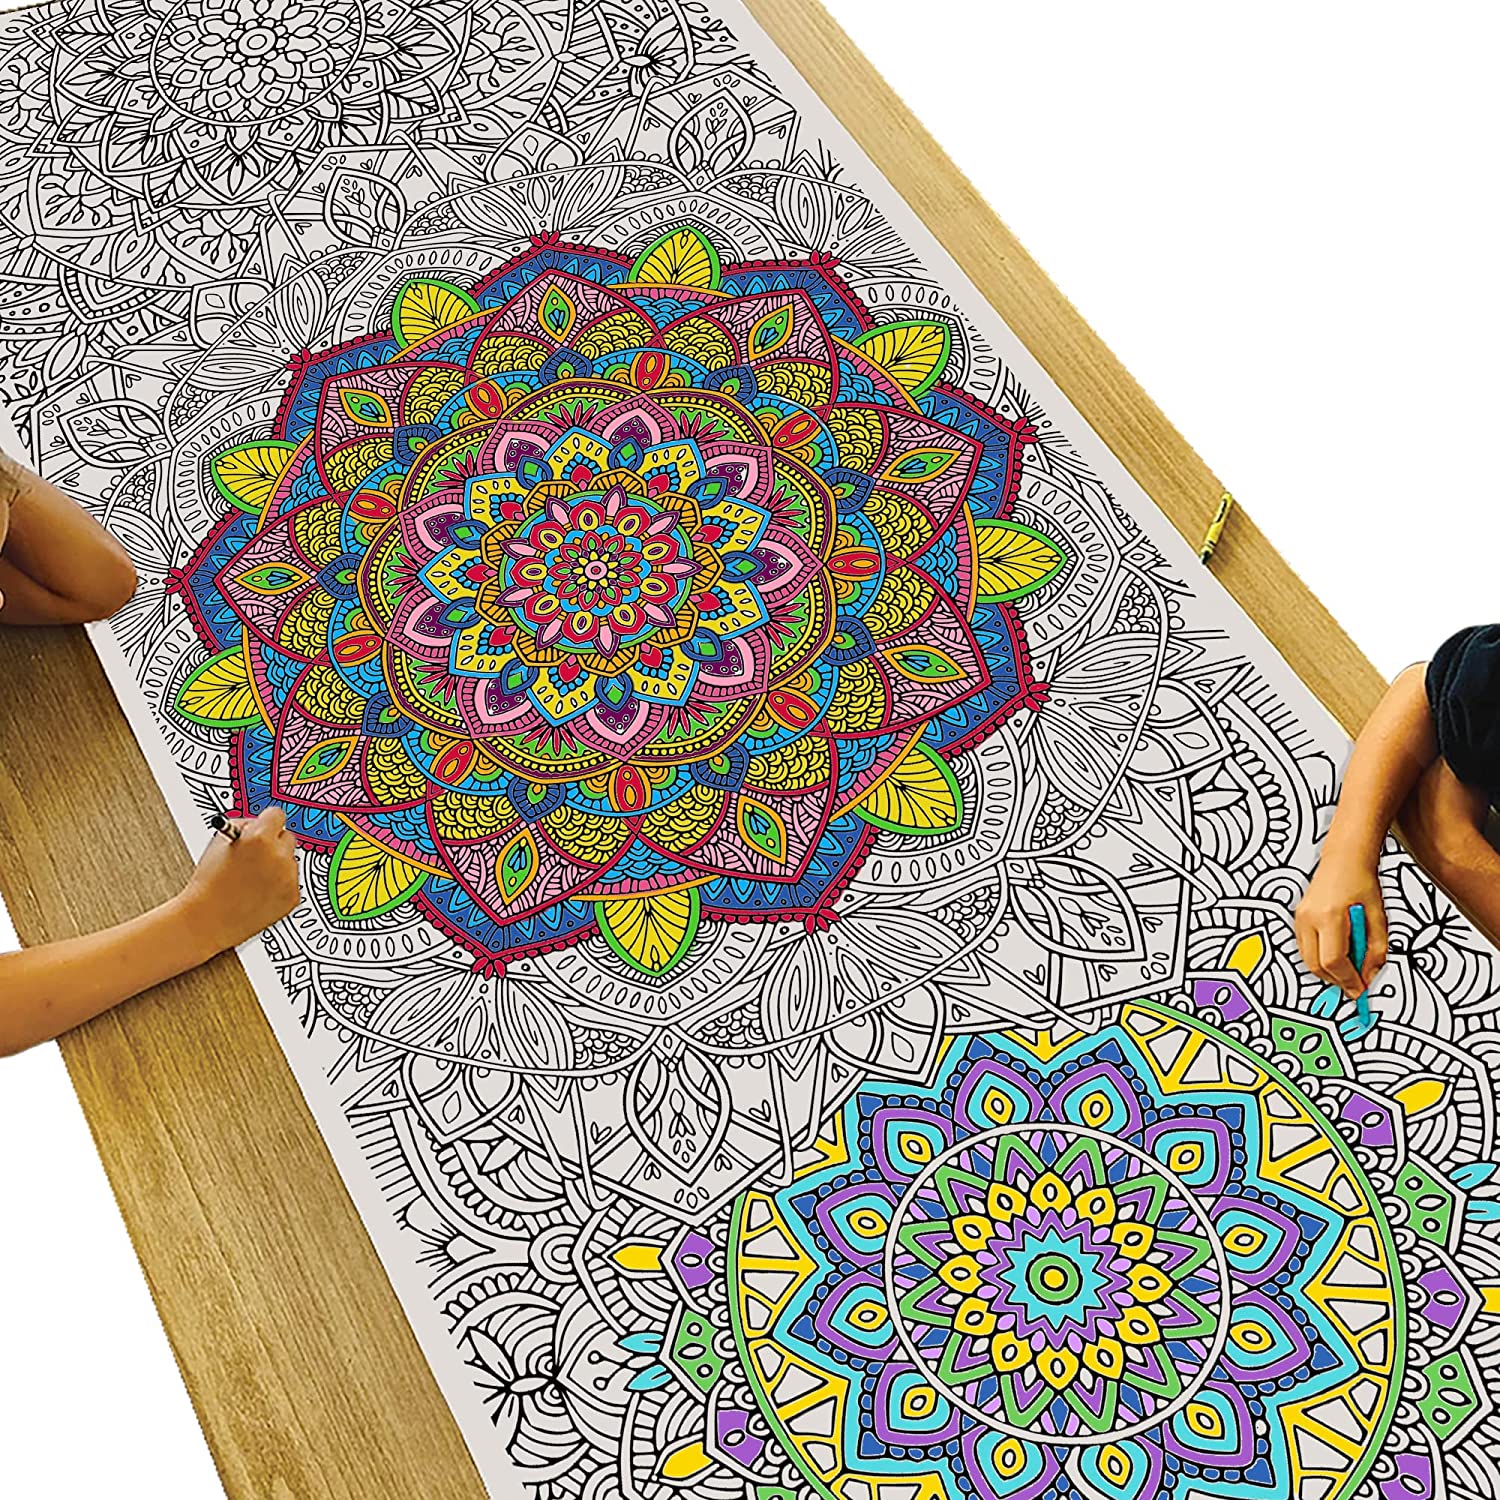 Elephant Giant Coloring Posters for Kids Adults Elephant Coloring Poster  39.37×51.96 Inch Mandala Coloring Posters Wall Art Decor Blank Banner for